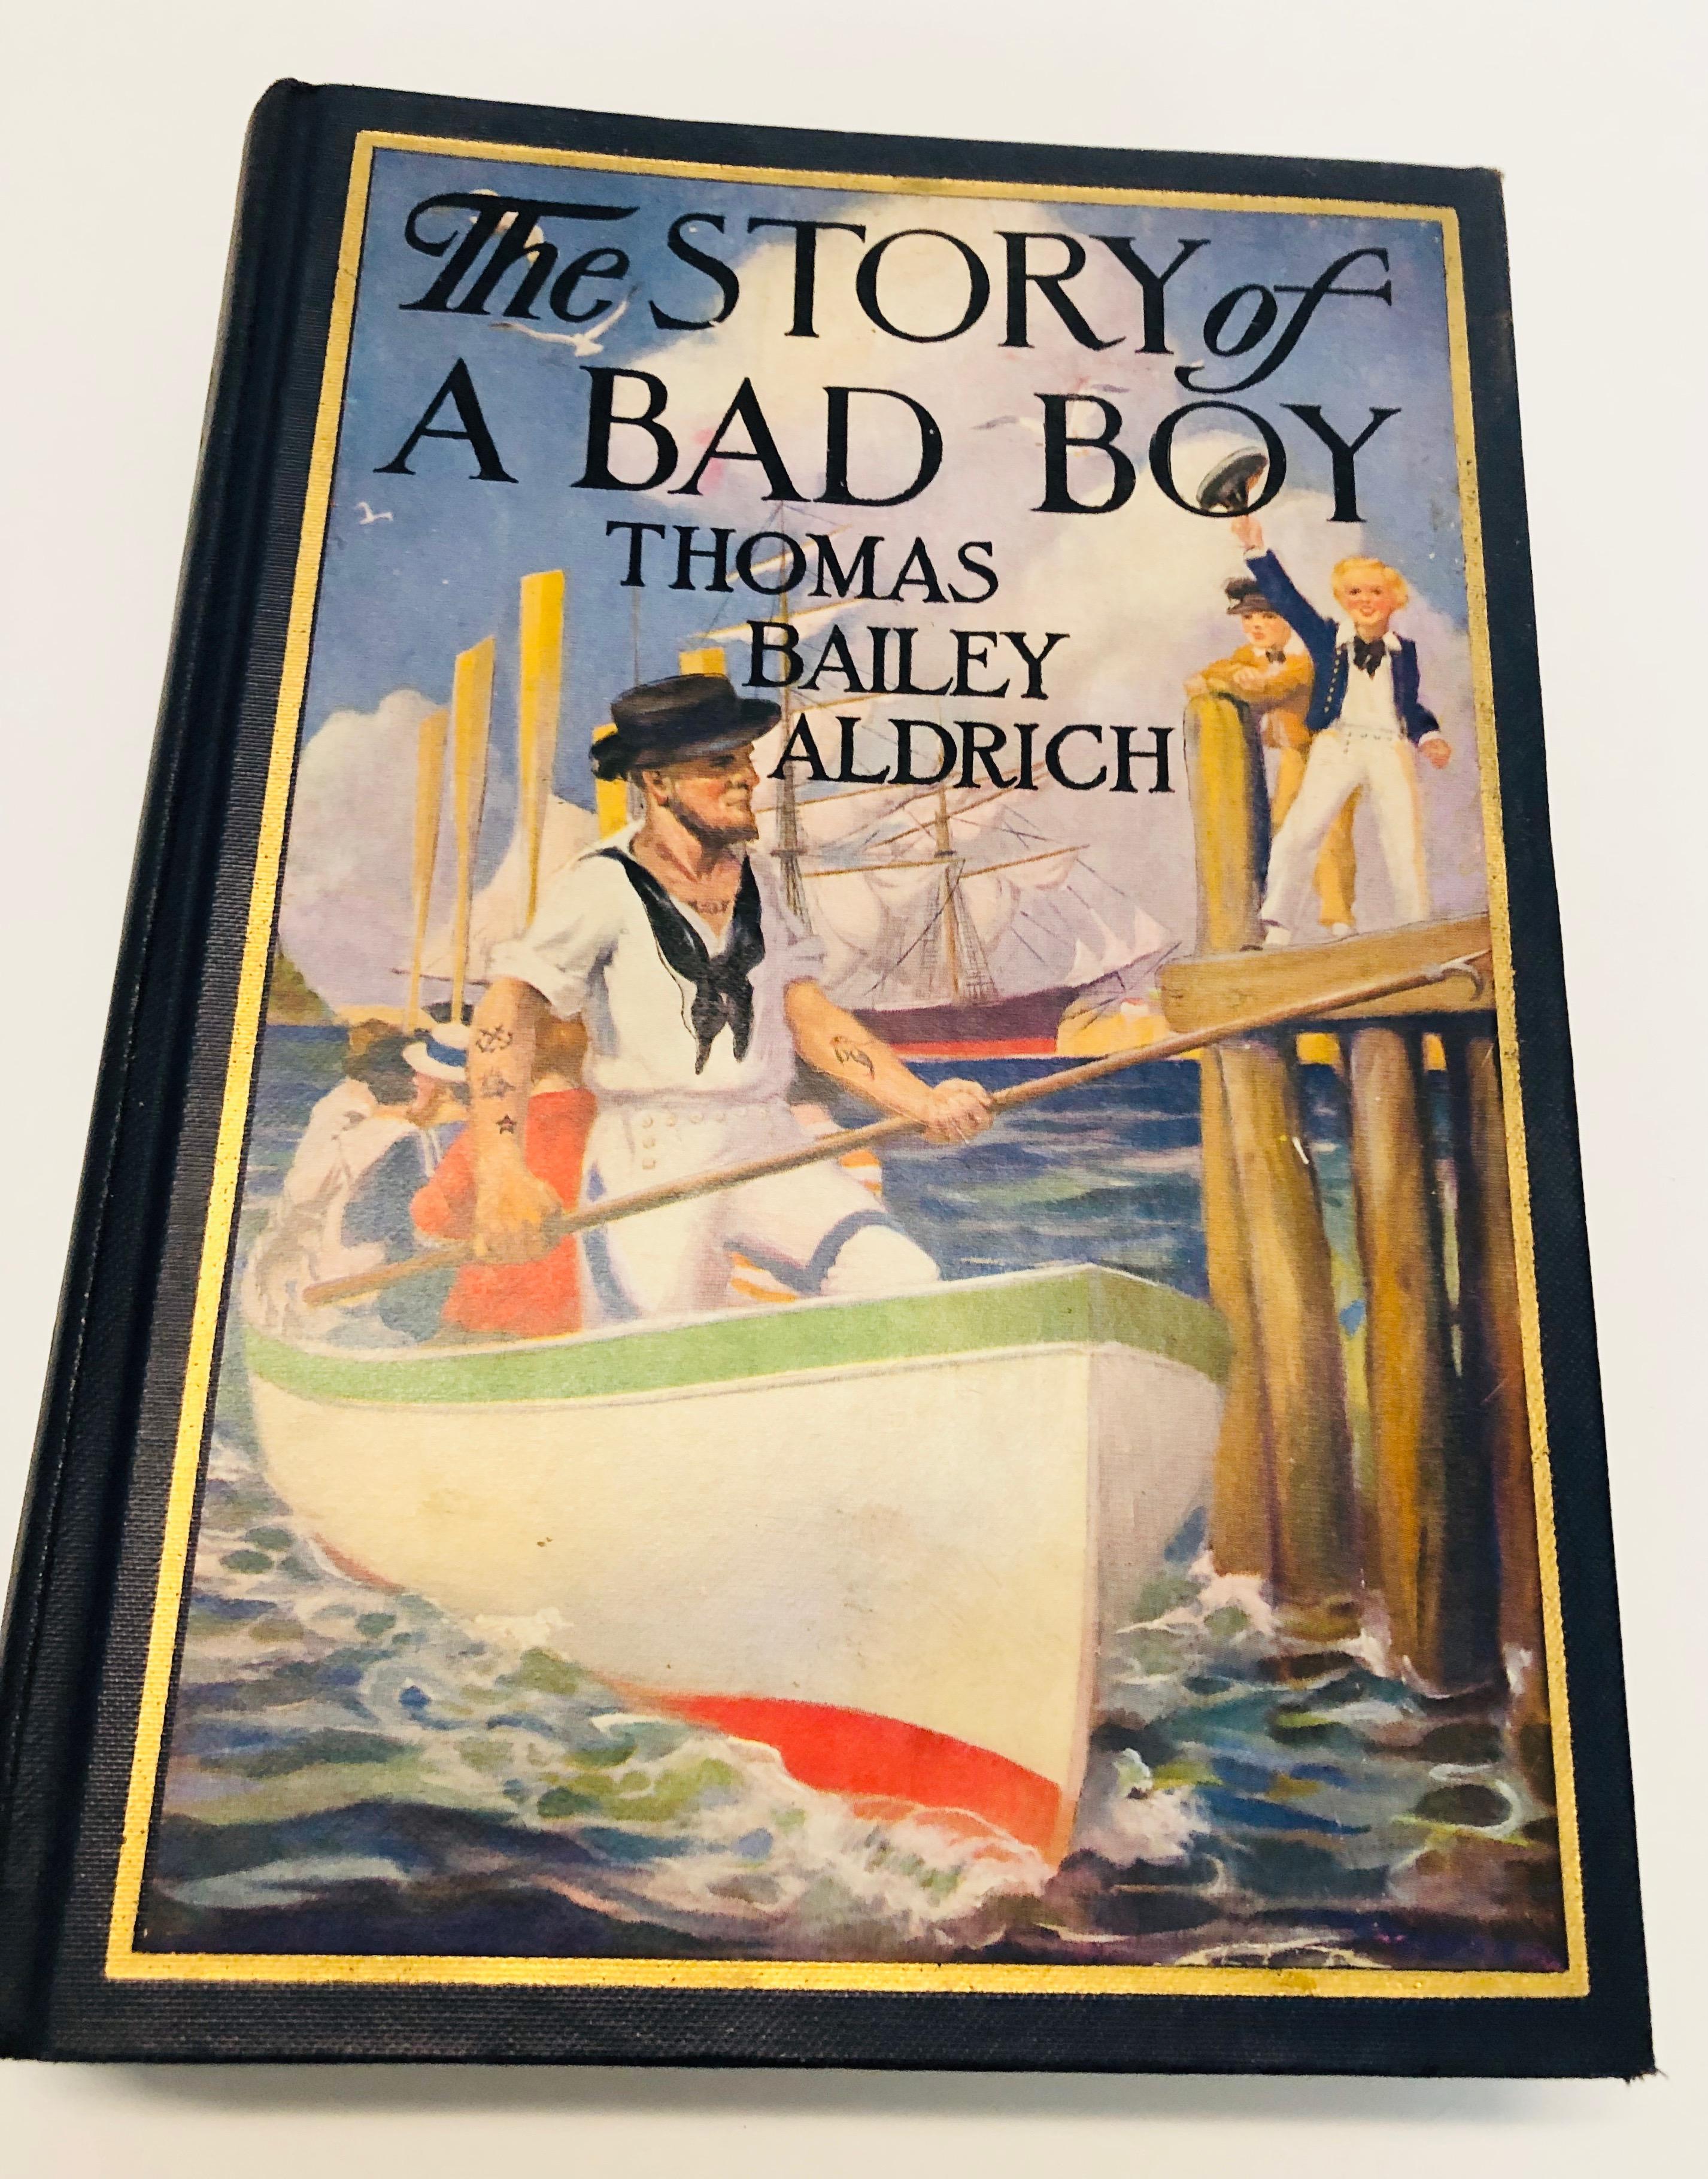 The Story of a Bad Boy by Thomas Bailey Aldrich (1927)